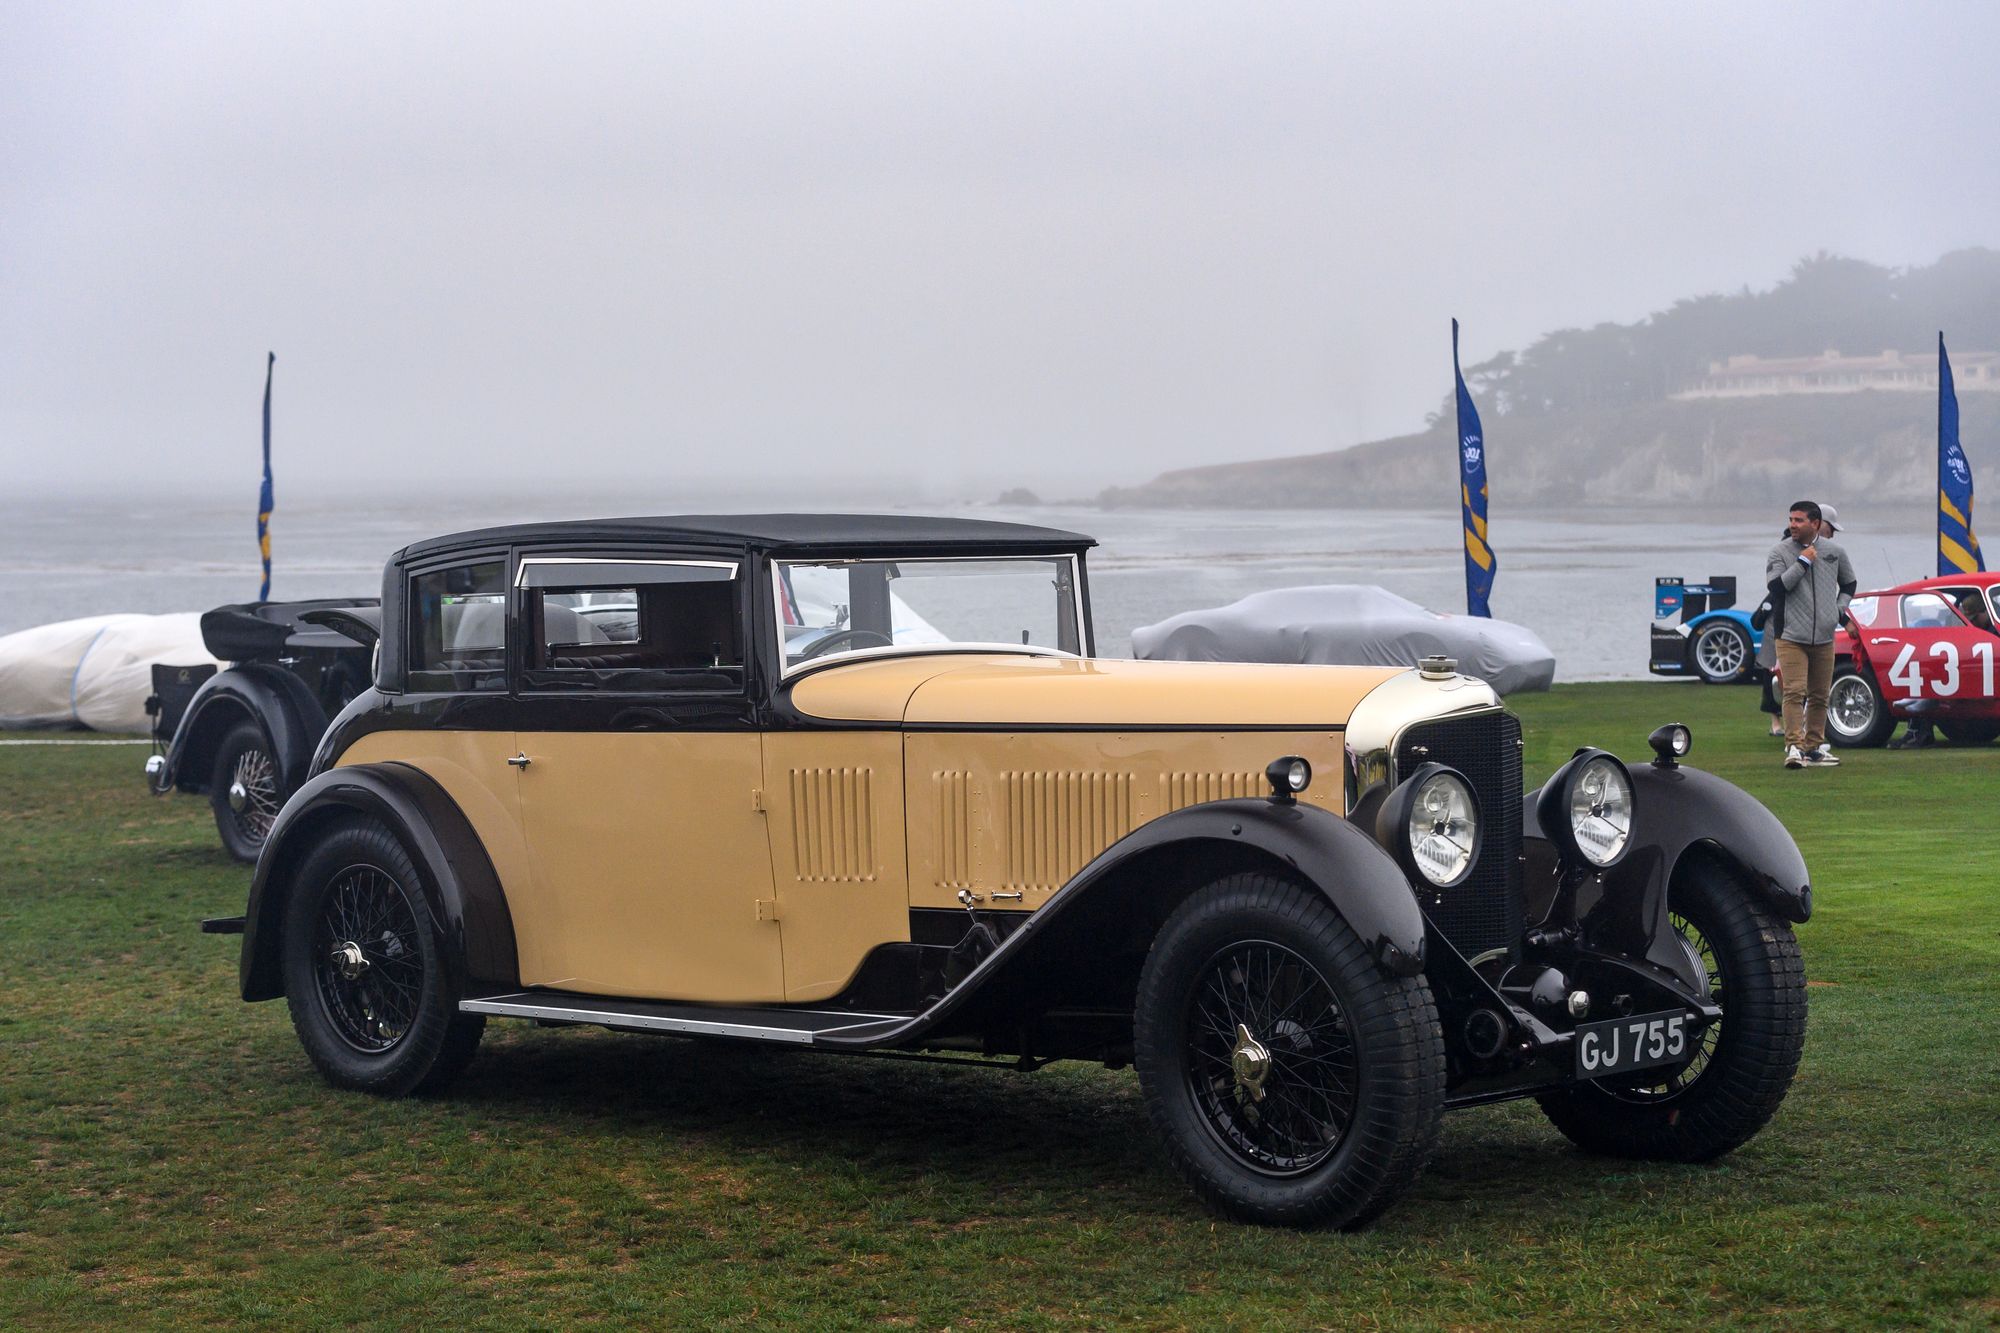 Second in Class at Pebble Beach